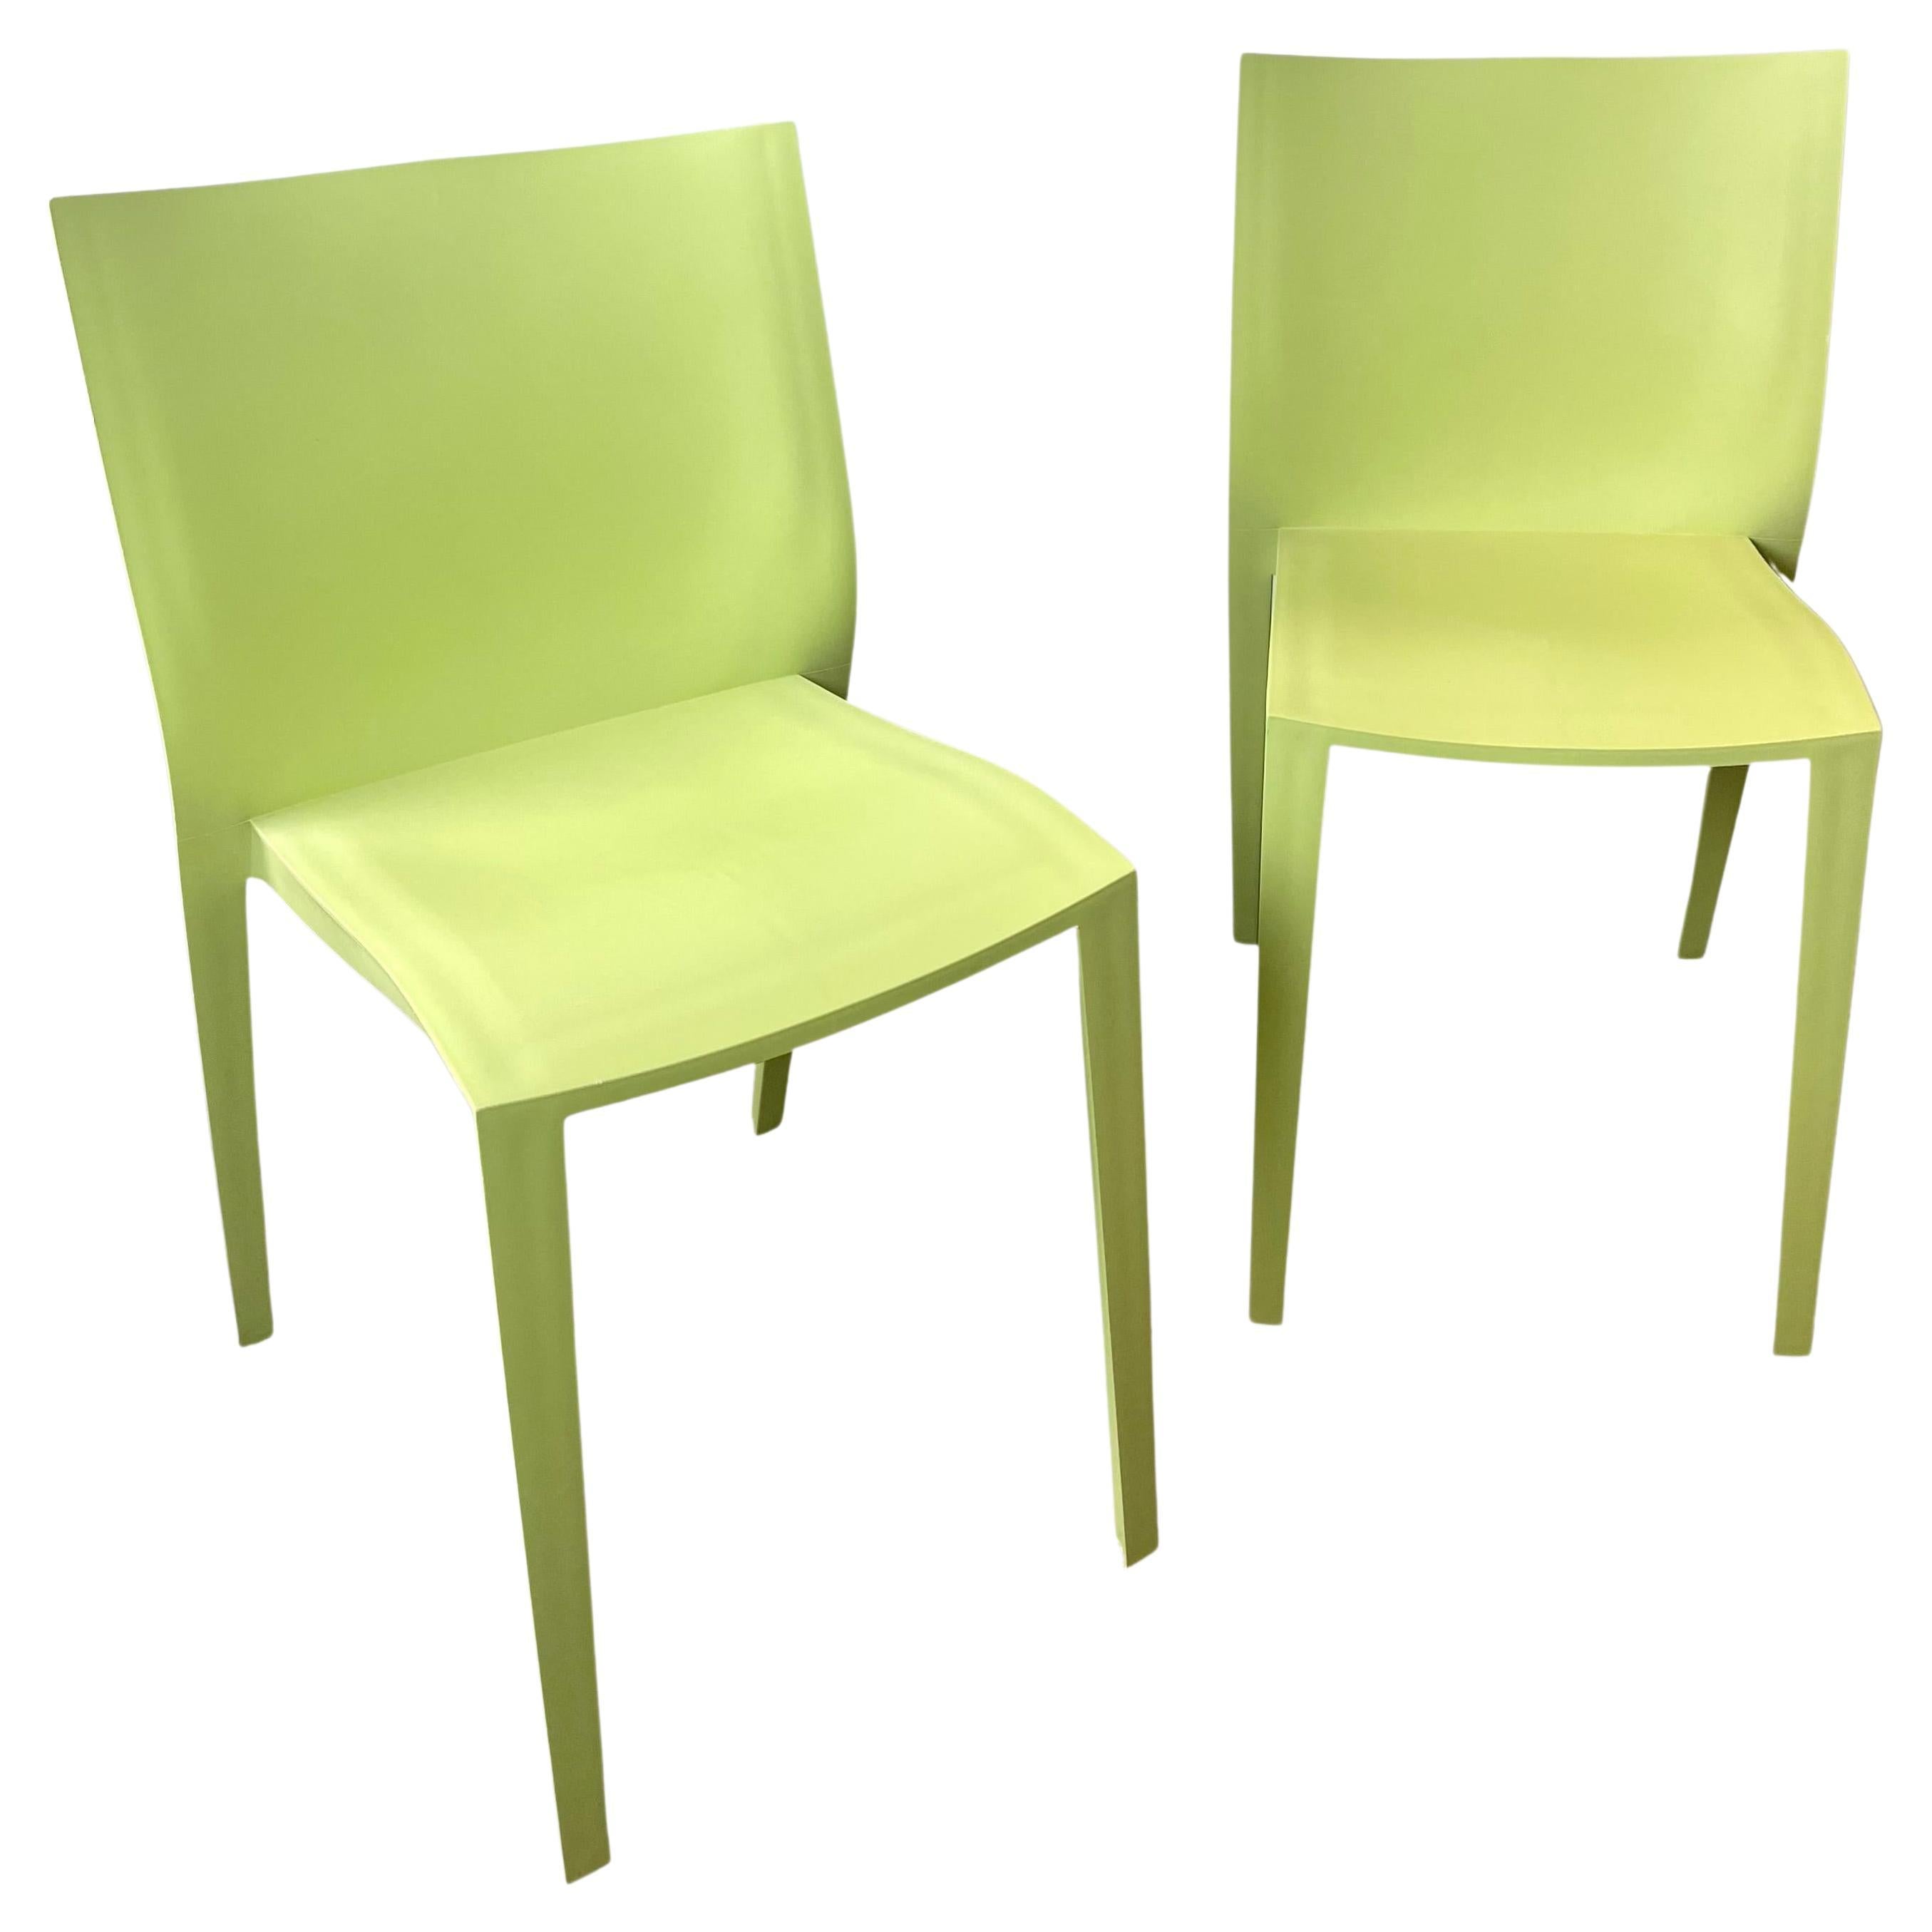 Philippe Starck, Set of 2 French Green Chairs, Design Slick Slick XO -  France For Sale at 1stDibs